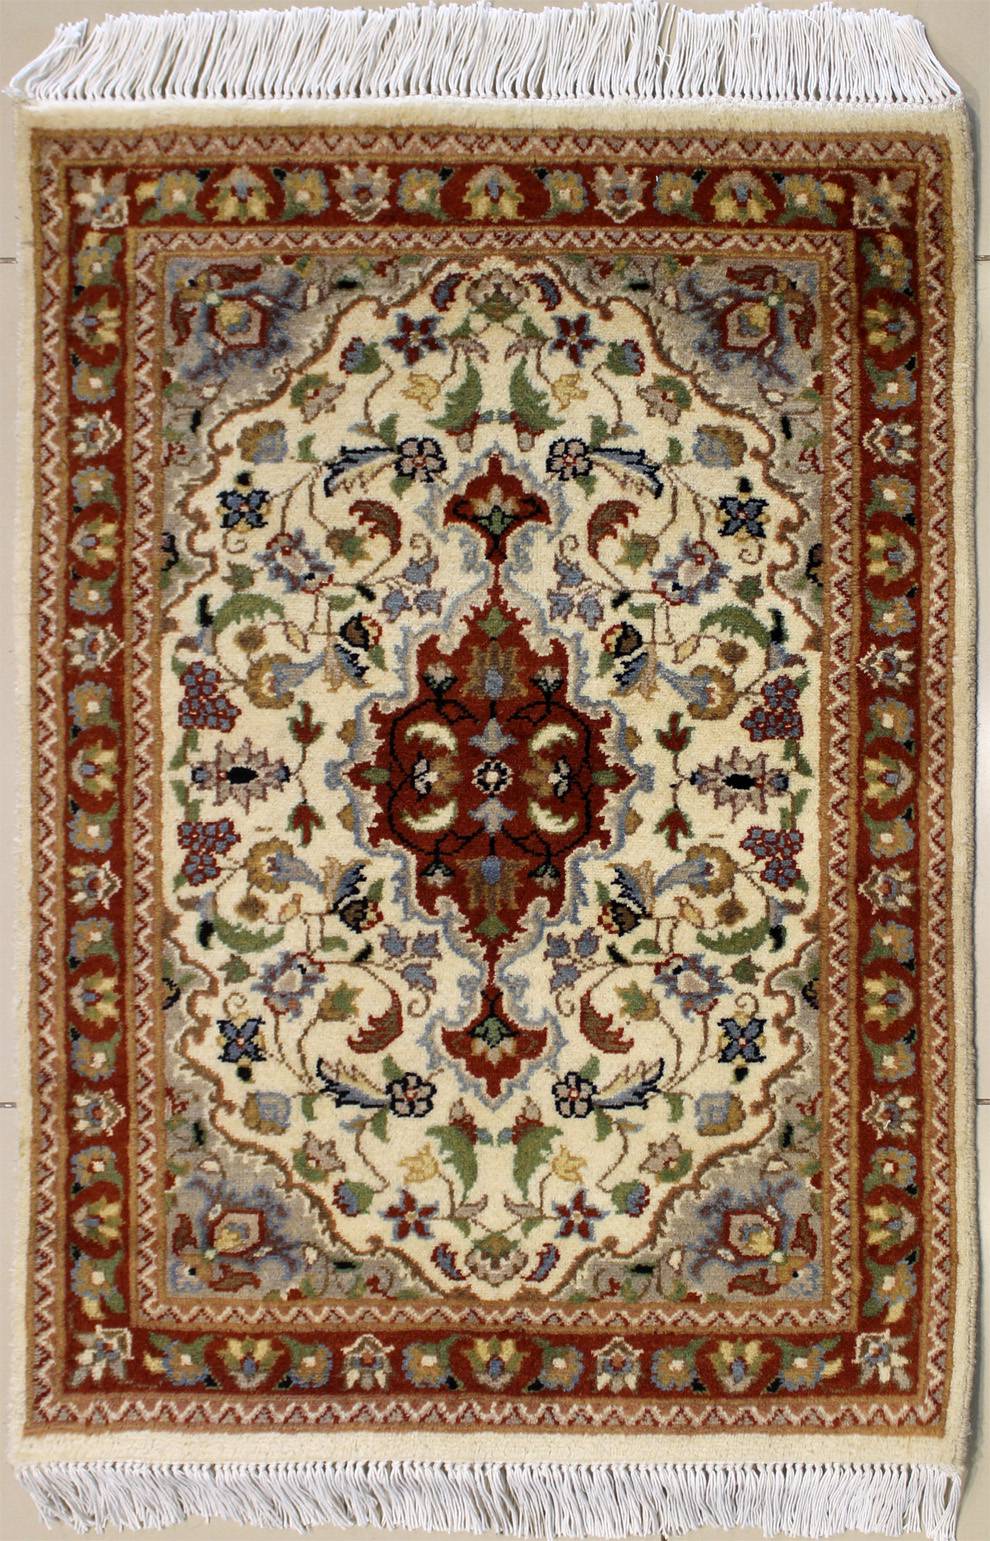 a 2x3 Rectangular Double Knot Rug Floral Design 100% Original Hand-Knotted in White,Red,Grey Colors RugsTC 2'0 x 3'2 Pak Persian Area Rug with Silk & Wool Pile